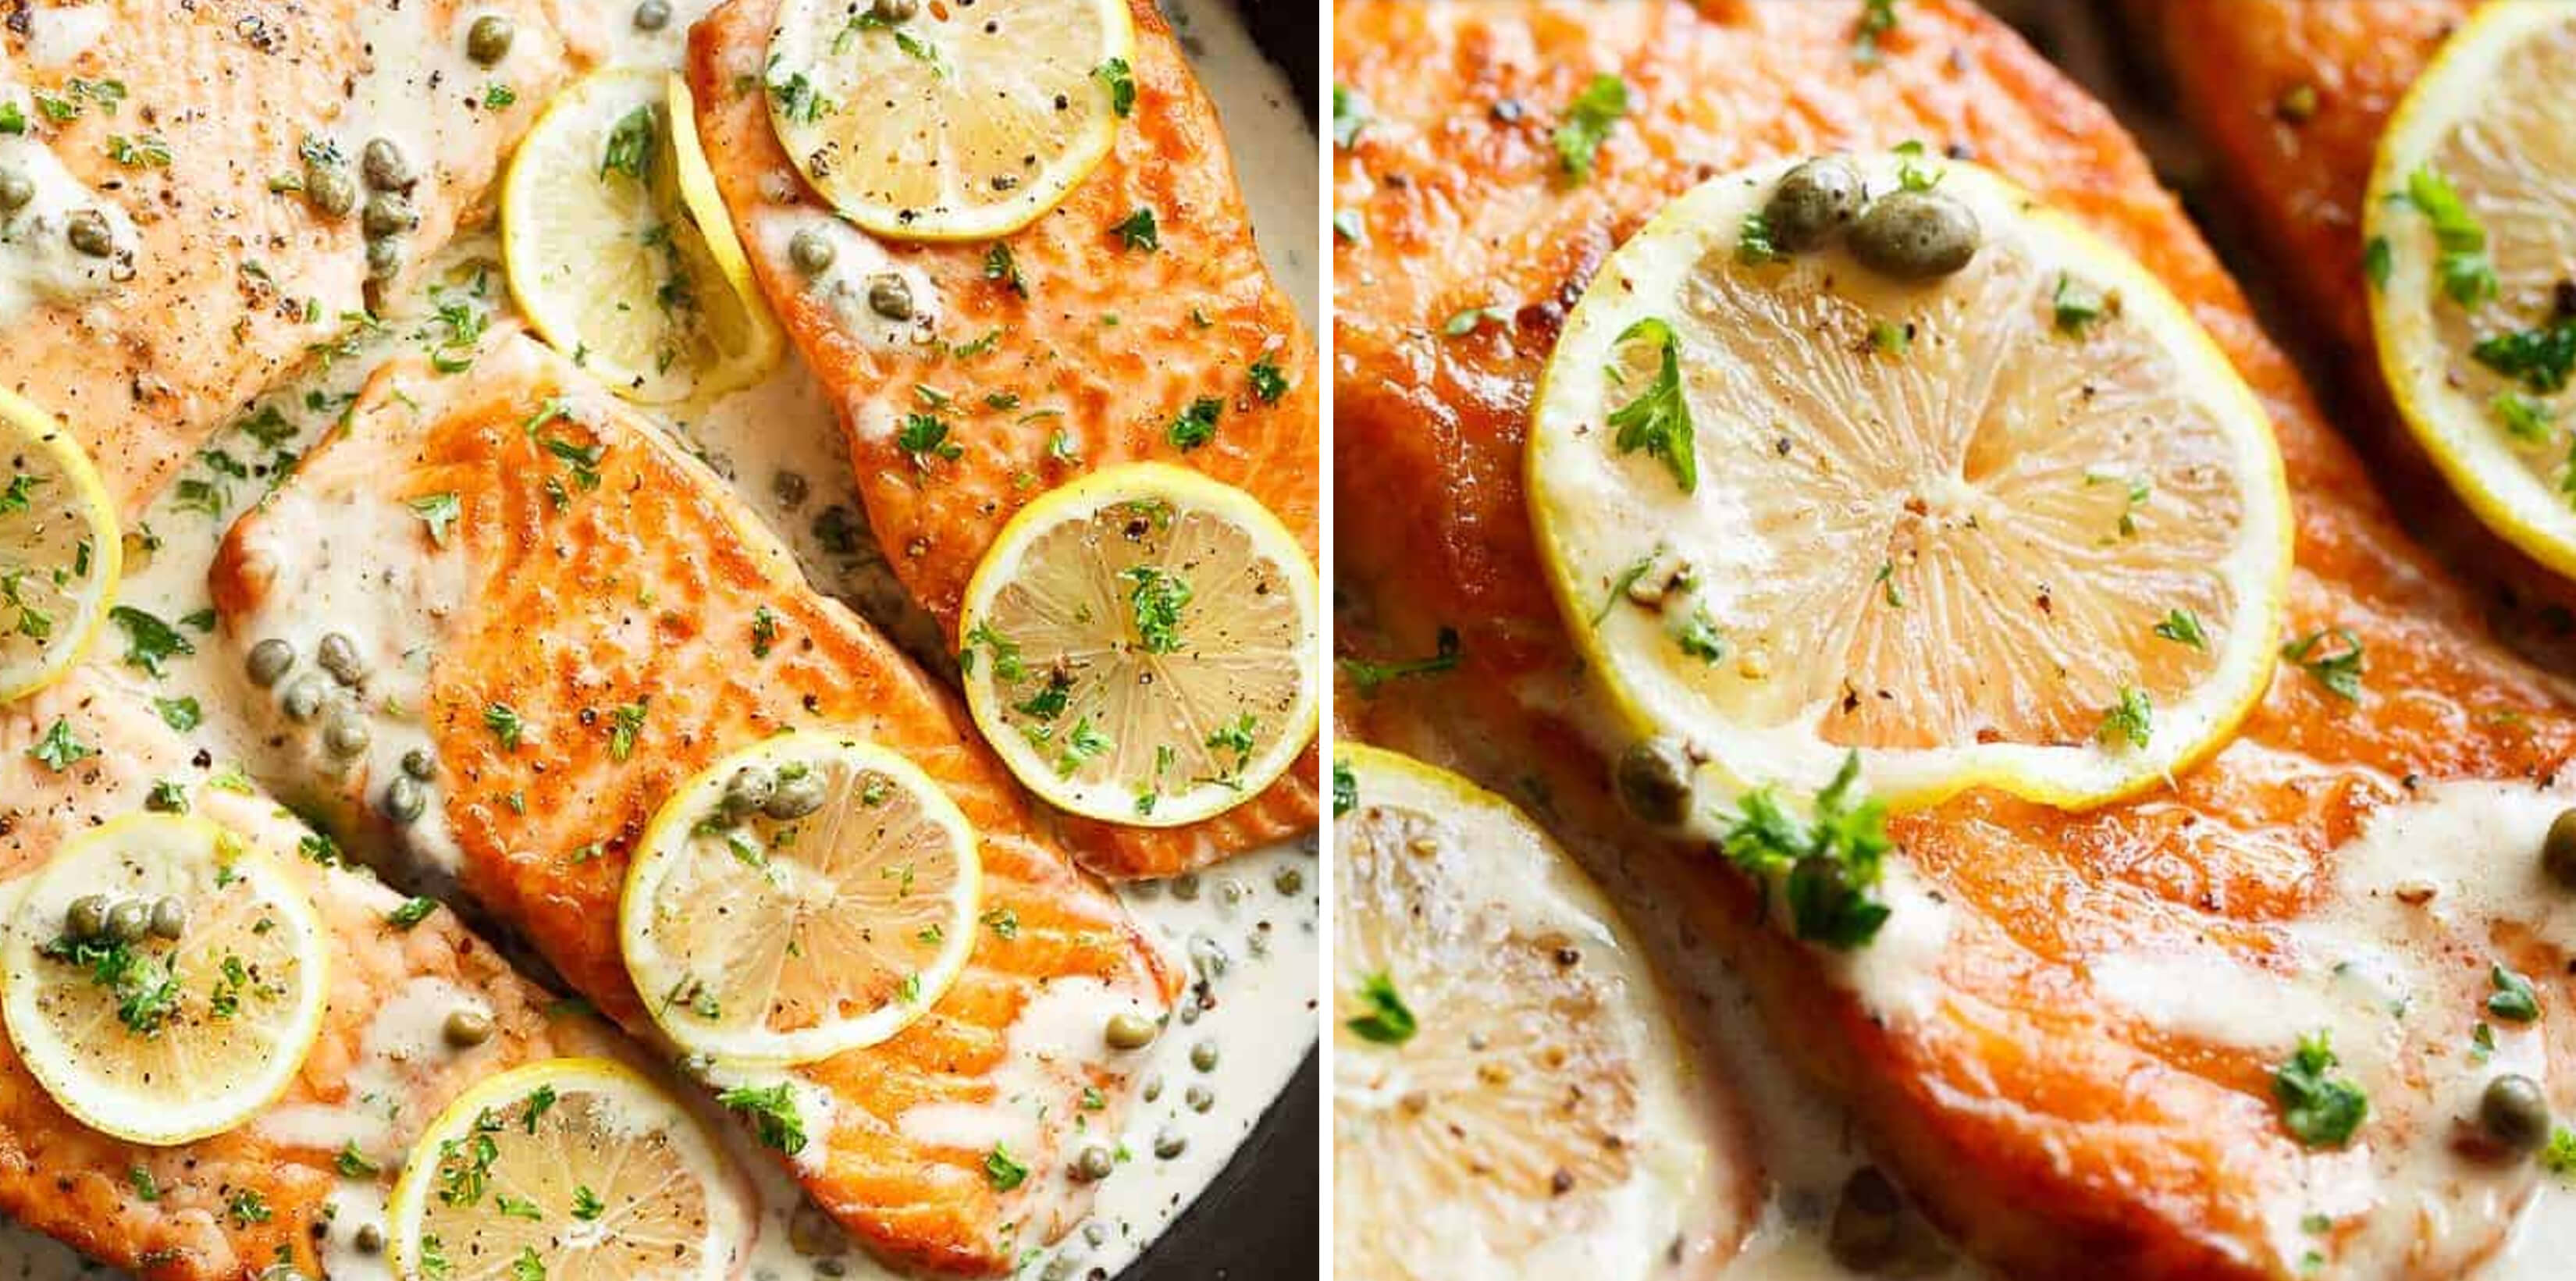 Enjoy this creamy lemon garlic salmon recipe just in time for your Easter celebrations!